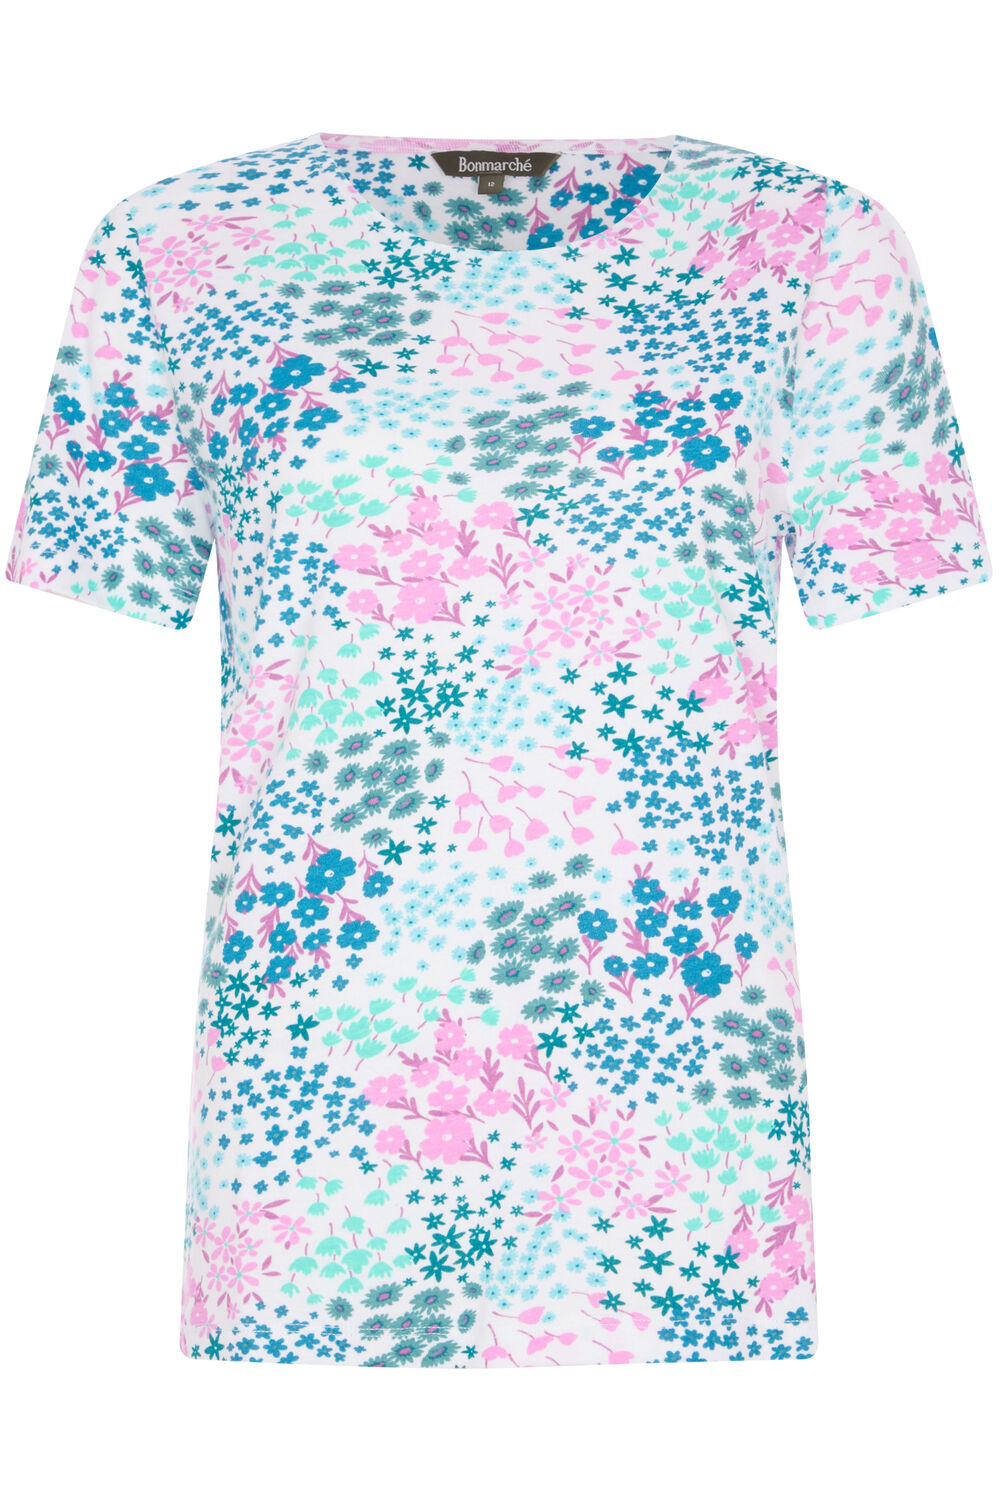 Bonmarche Ivory Short Sleeve Pressed Ditsy Print Scoop Neck T-Shirt, Size: 10